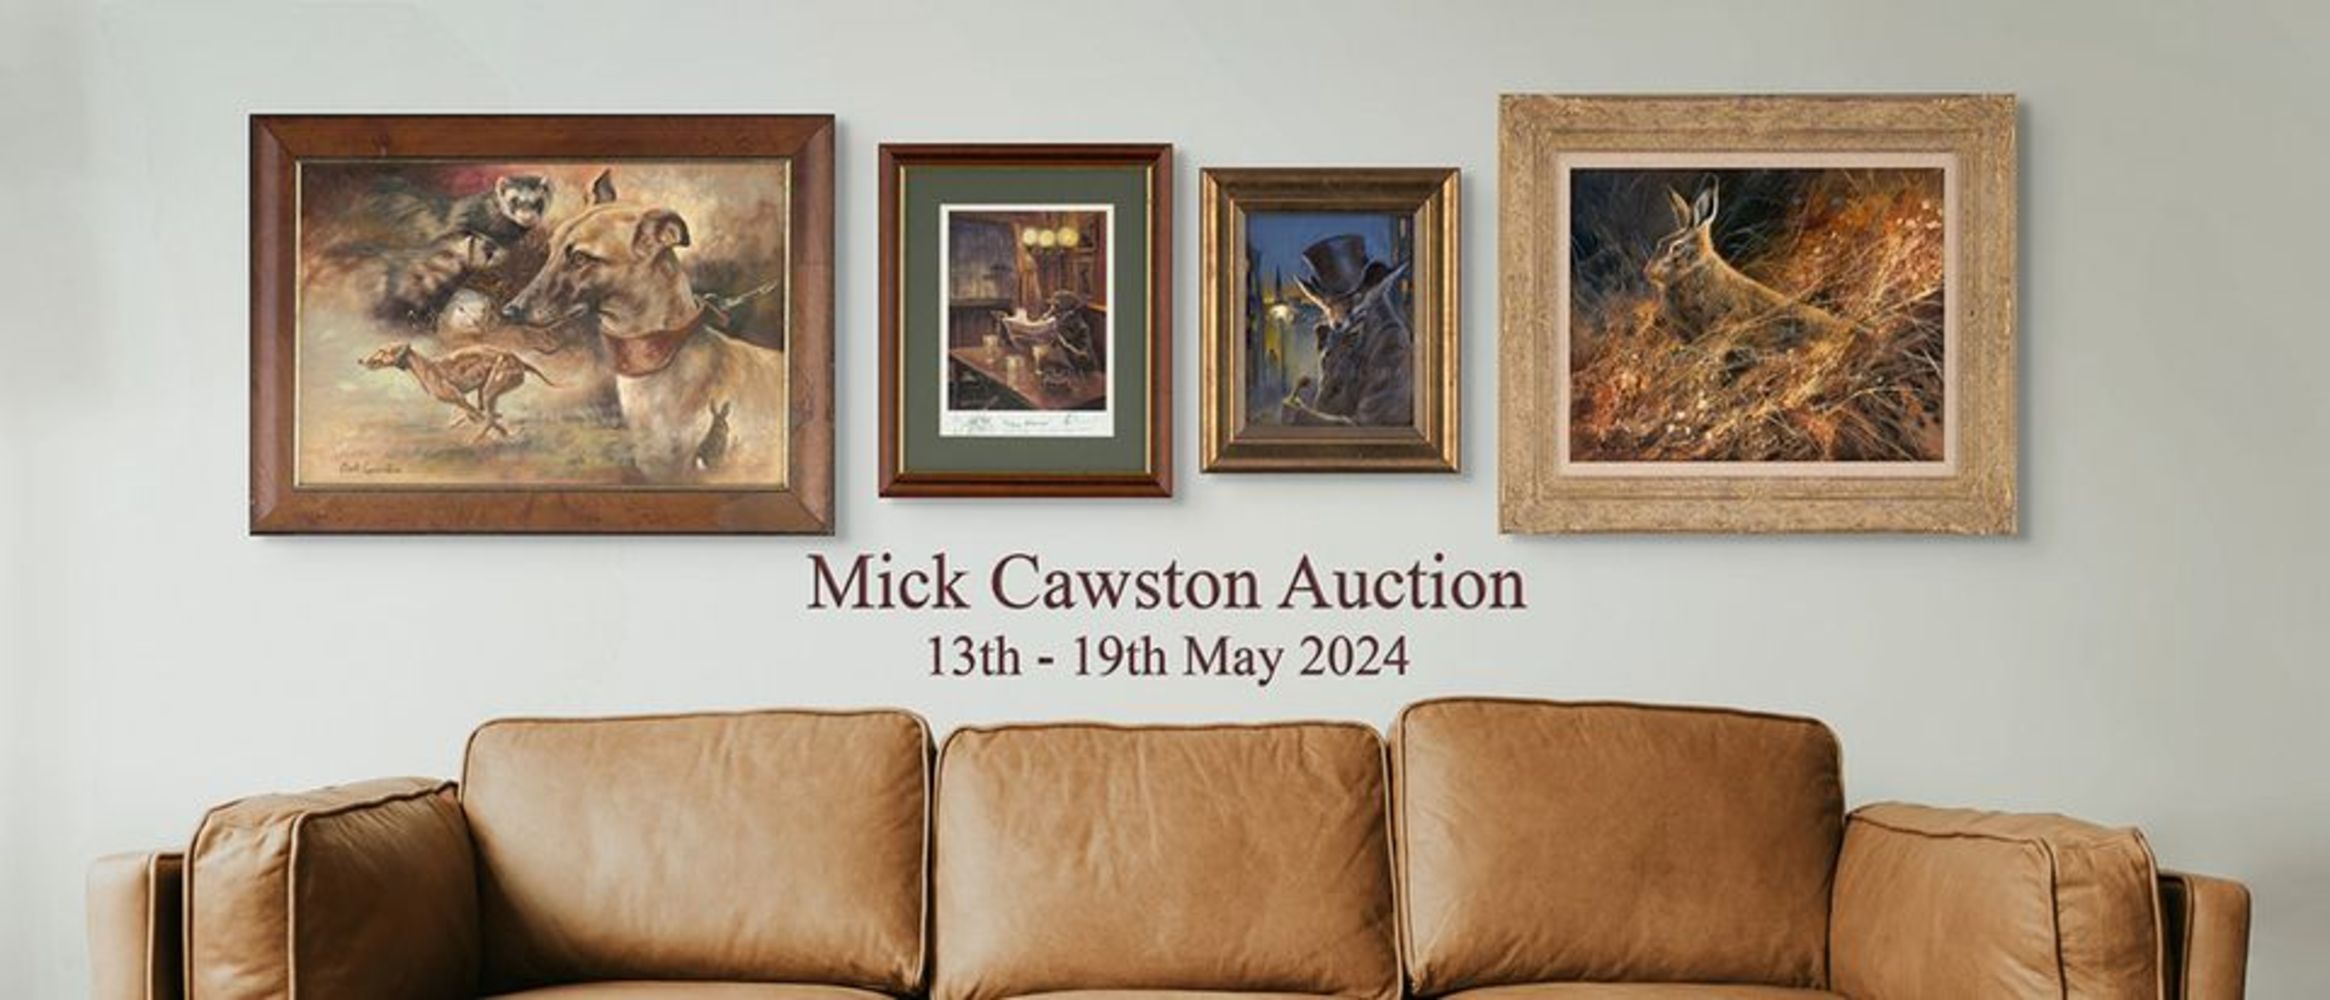 Auction of the Work of Mick Cawston 2024